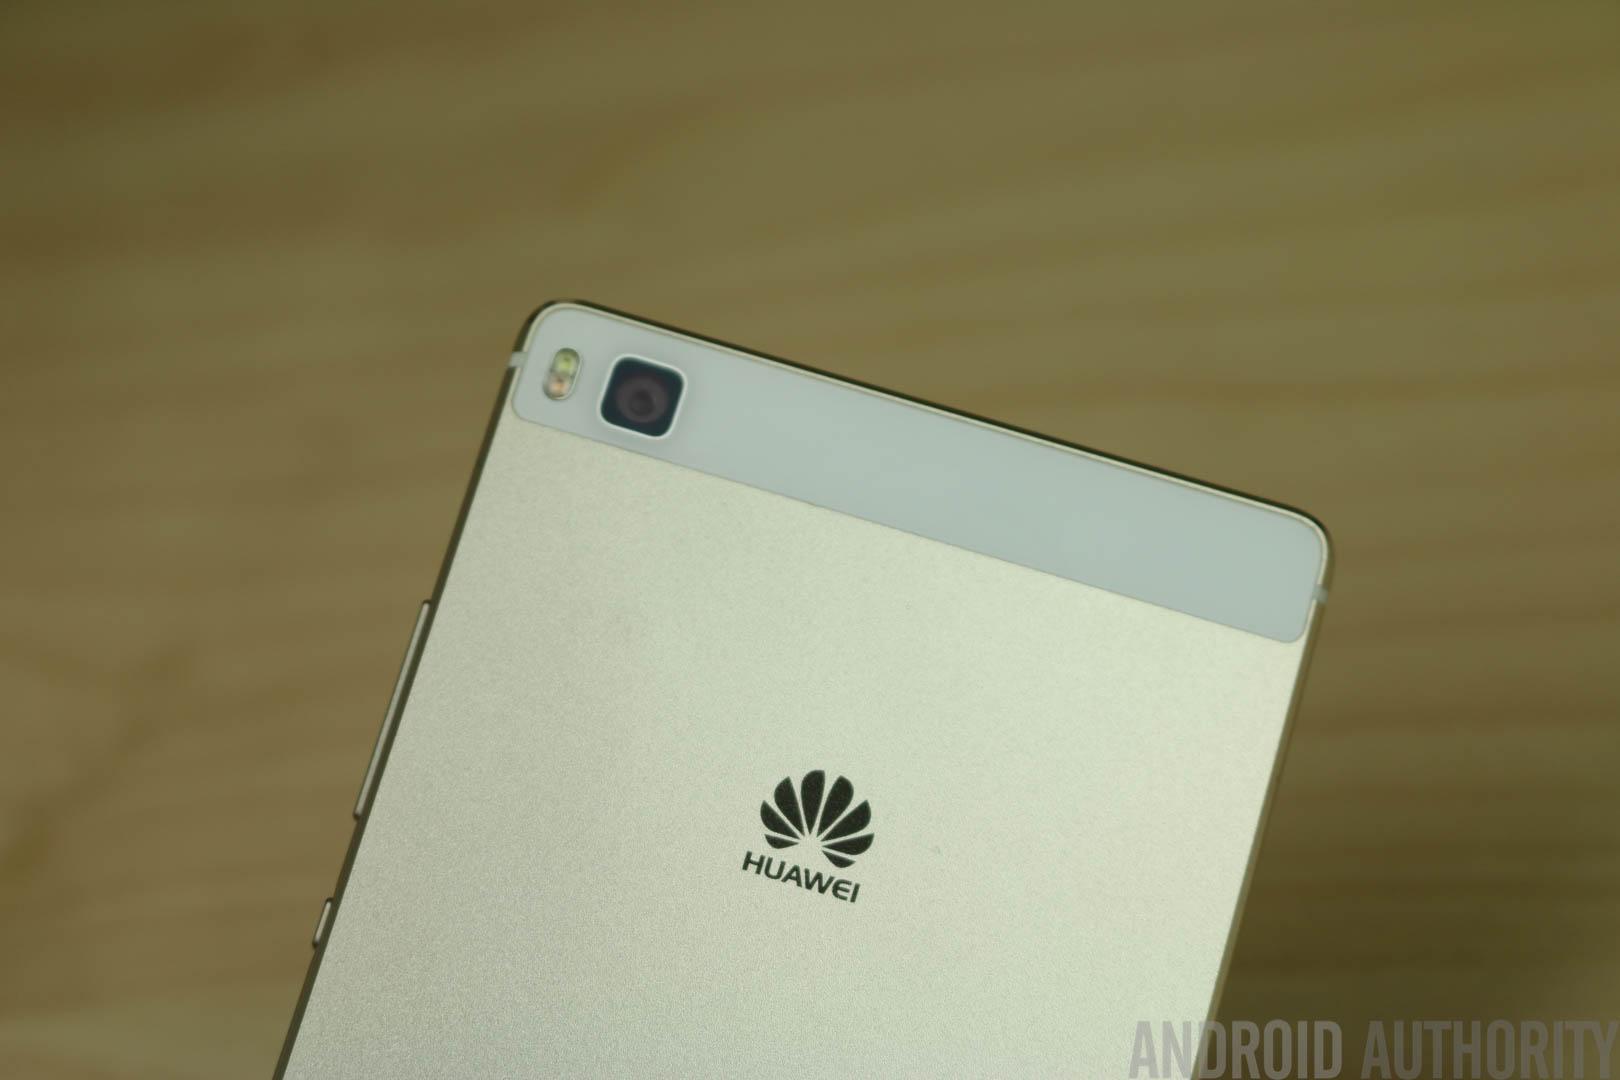 Huawei-P8-Hands-On5